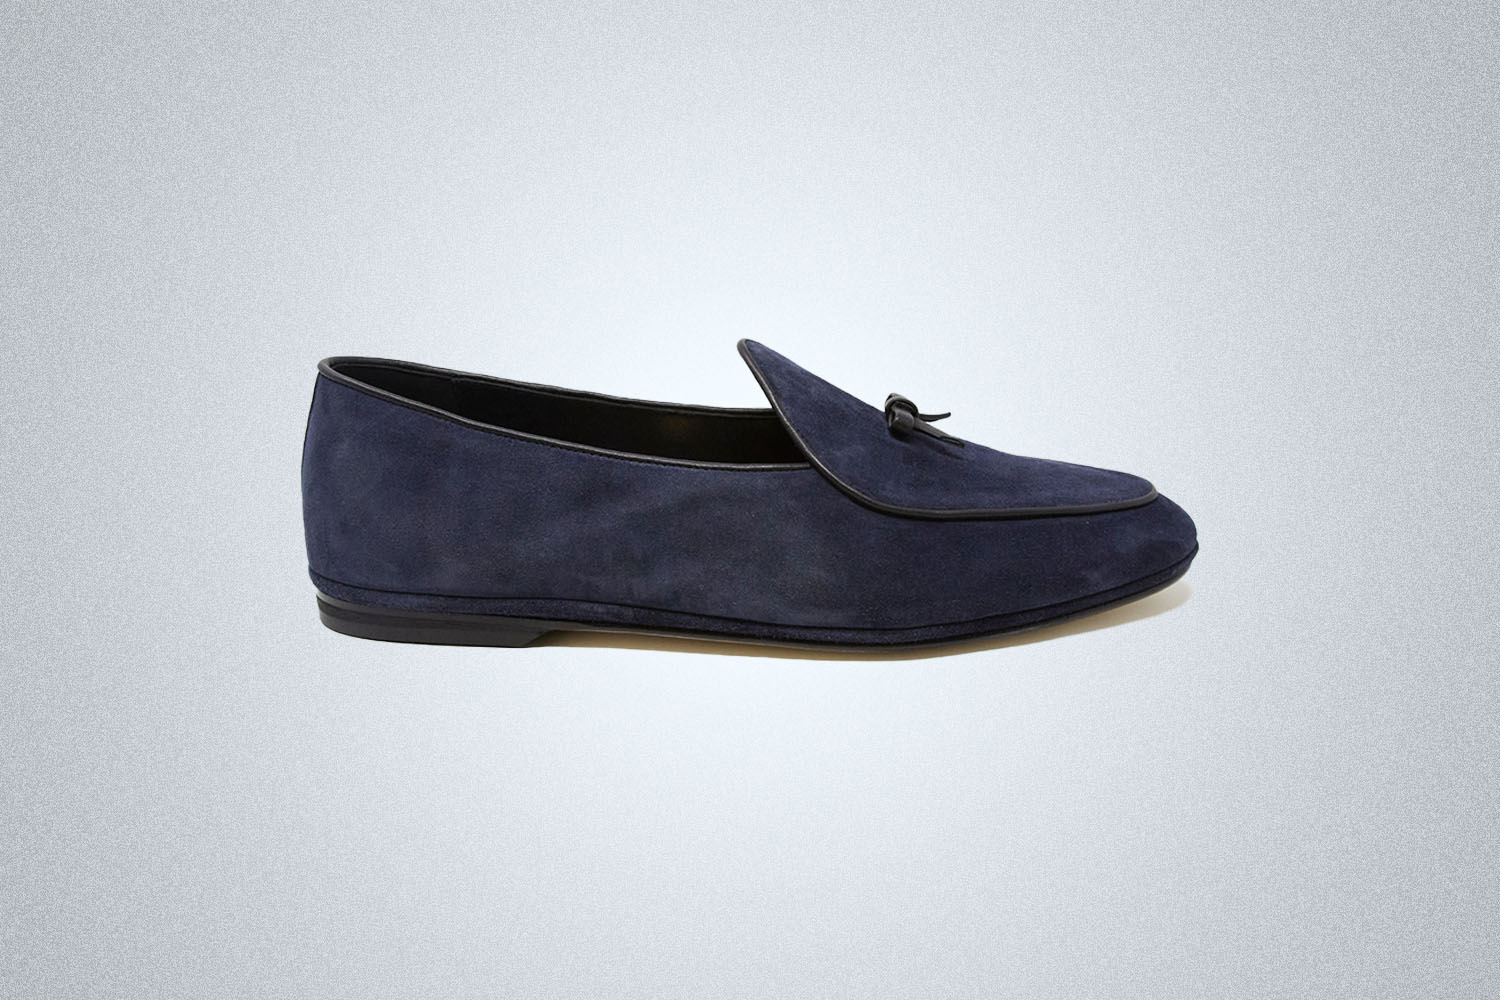 A pair of Summer Loafers from Todd Snyder on a grey background